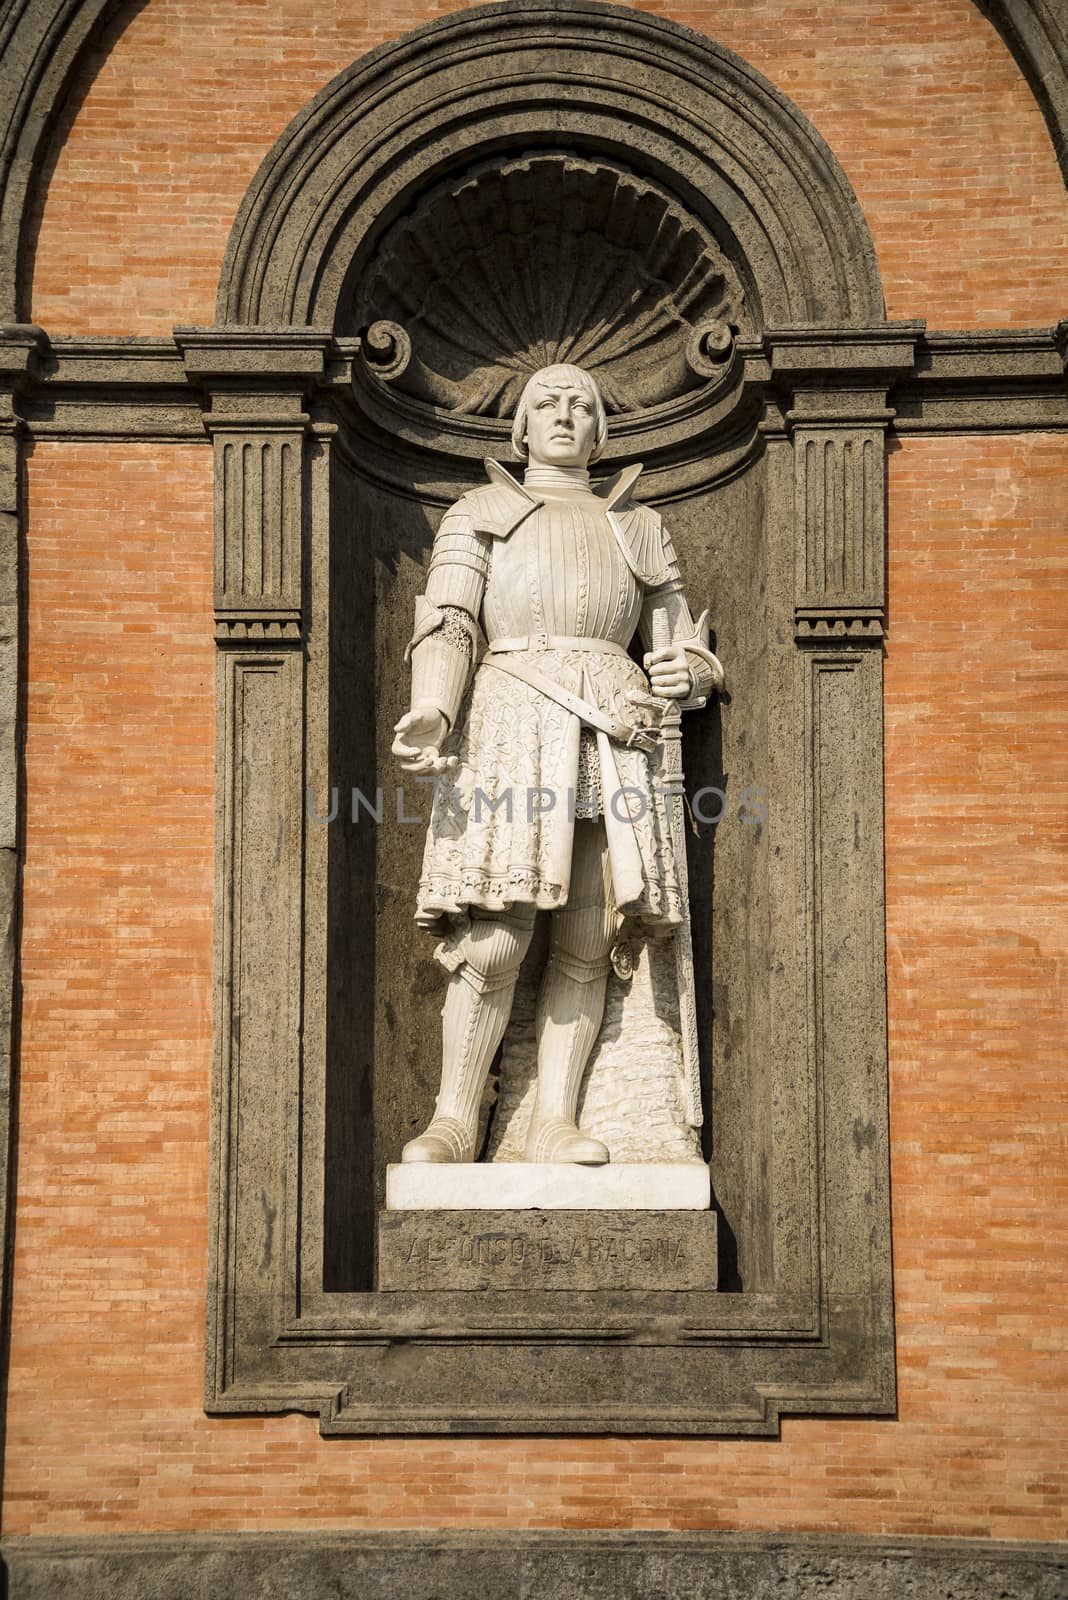 Statue of king Alfonso of Aragon in a niche of the wall of the Royal Palace of Naples, Italy